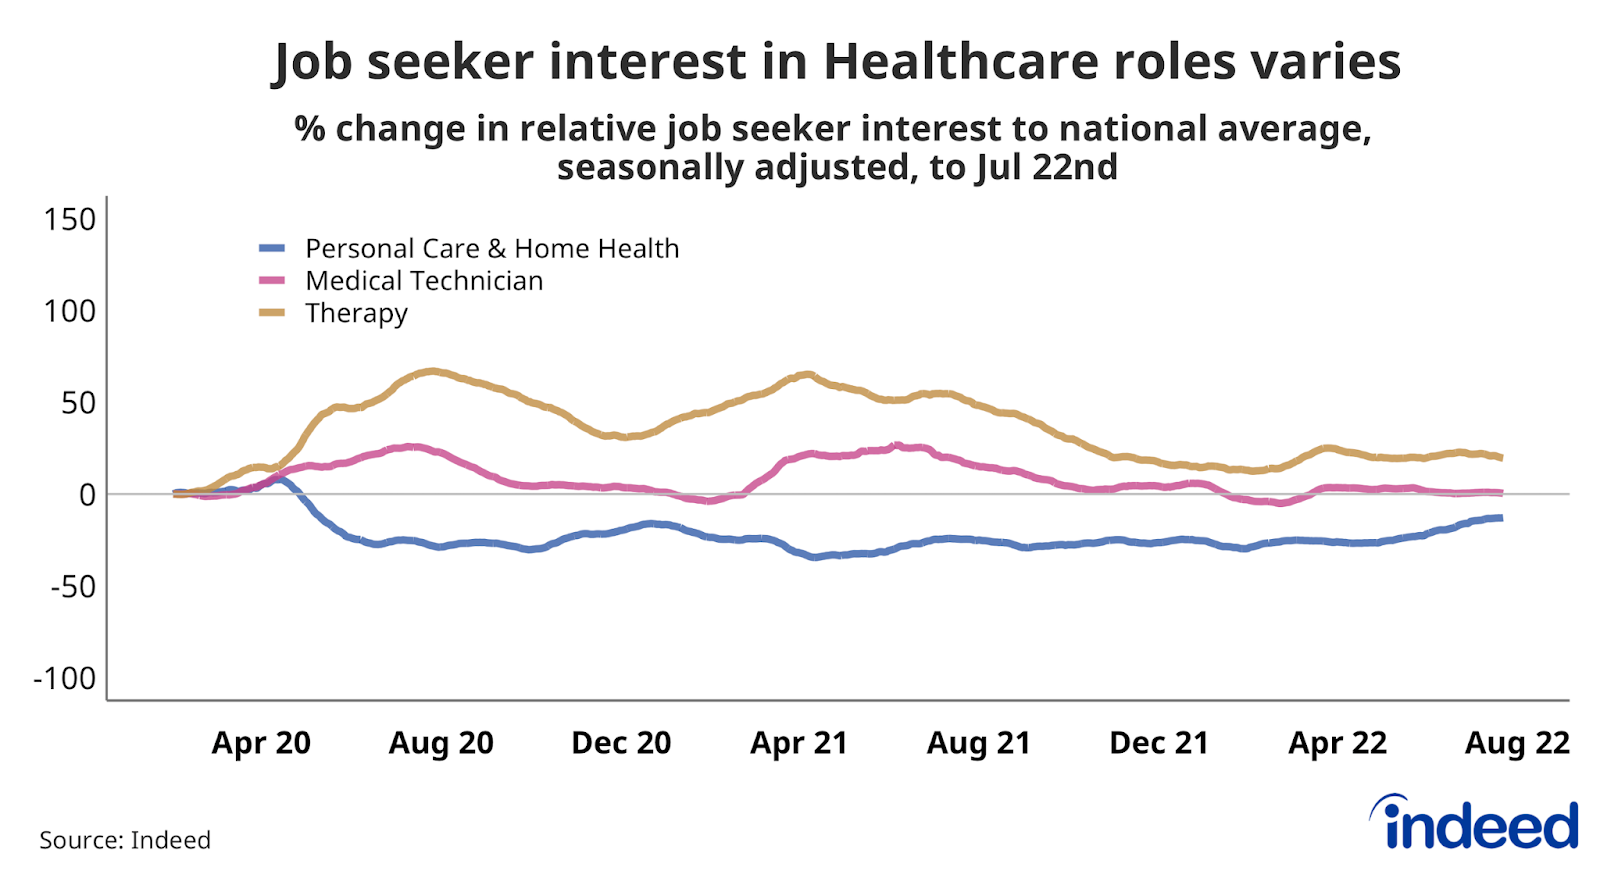 Line graph showing the % change in job seeker interest for Healthcare roles relative to the national average.